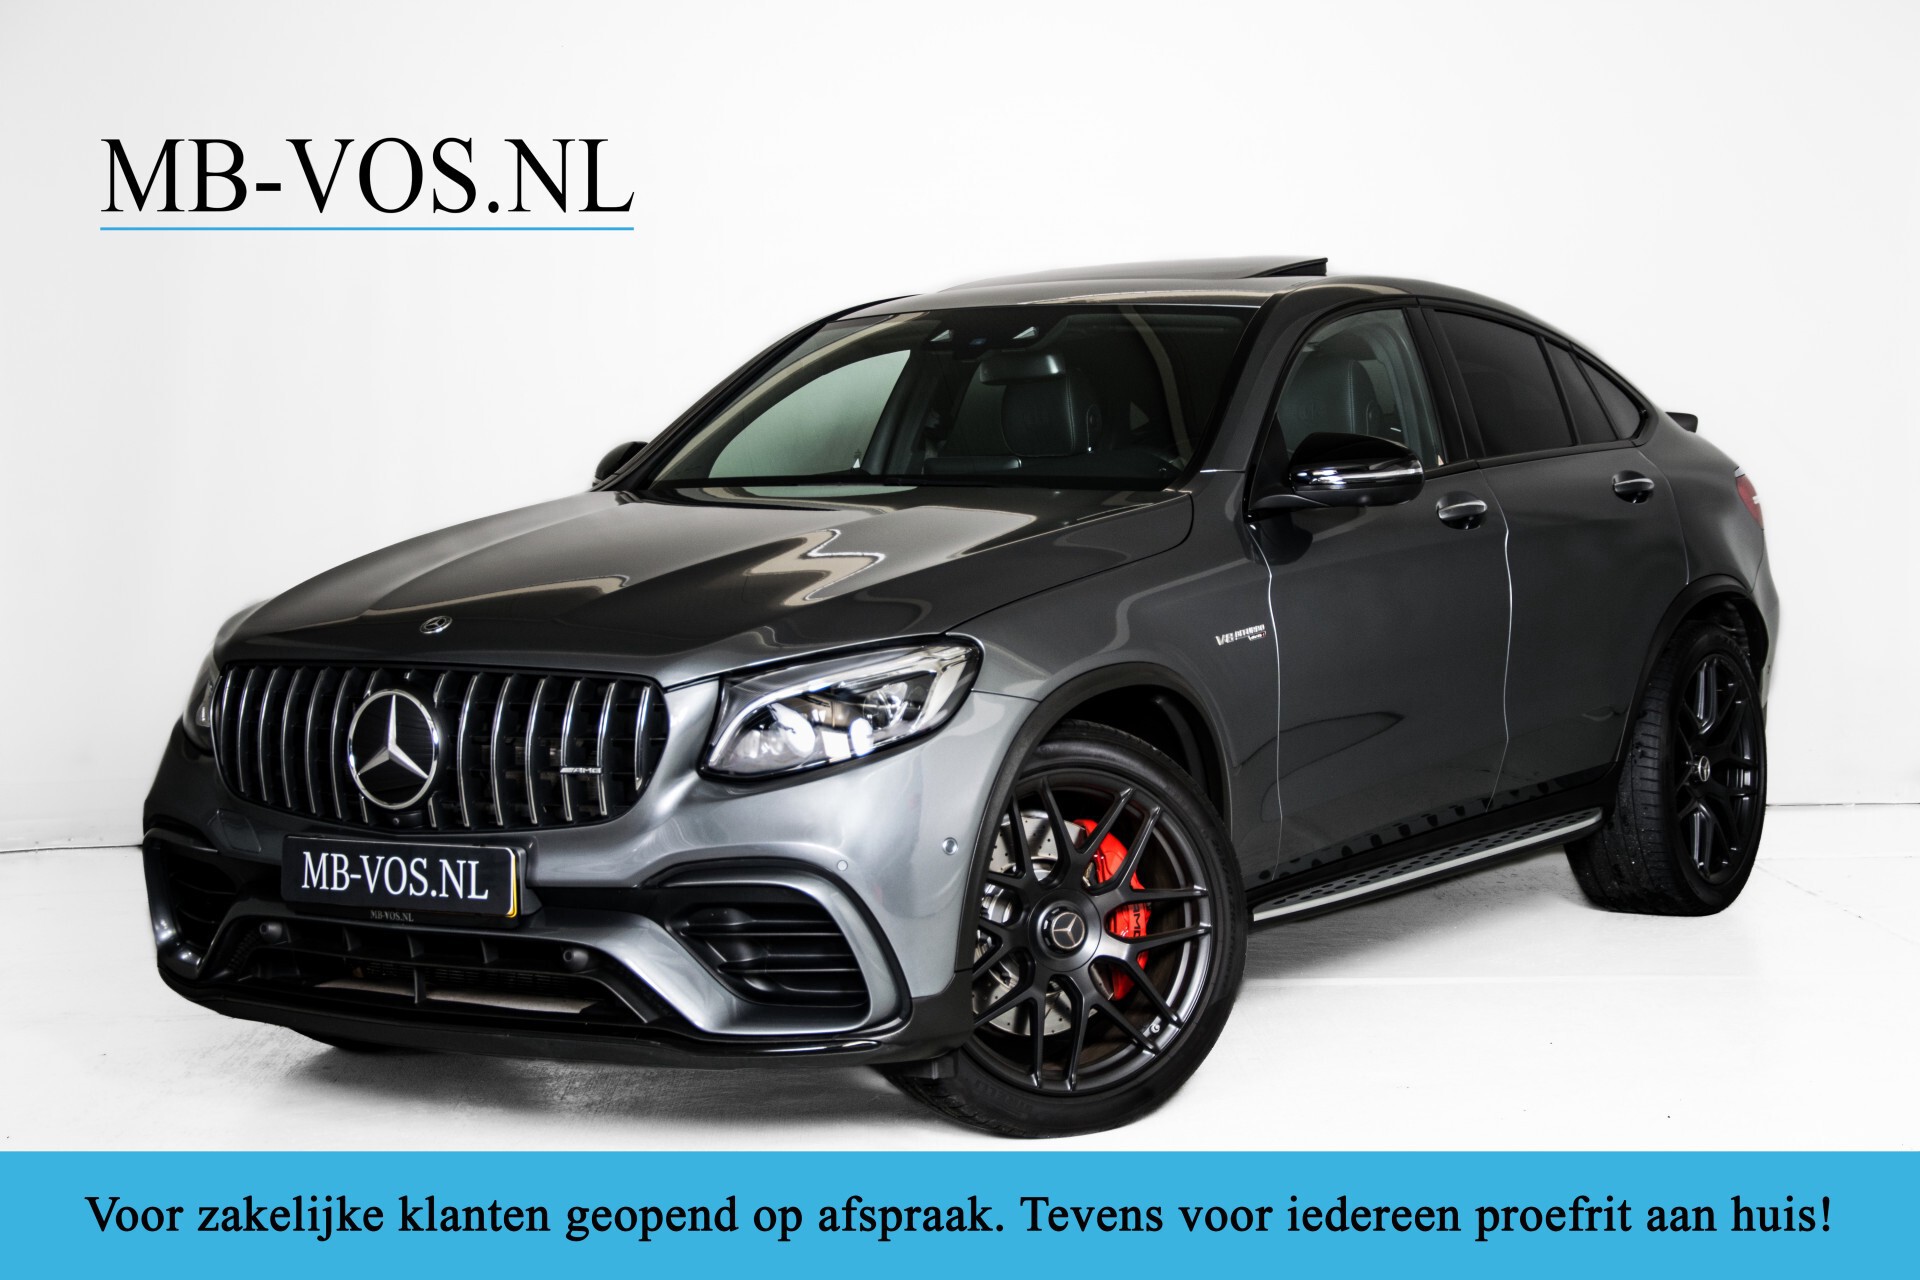 Mercedes-Benz GLC Coupé 63 S AMG 4MATIC+ Carbon/Night/Nappa/Trhk/Drivers Package Aut9 Foto 1